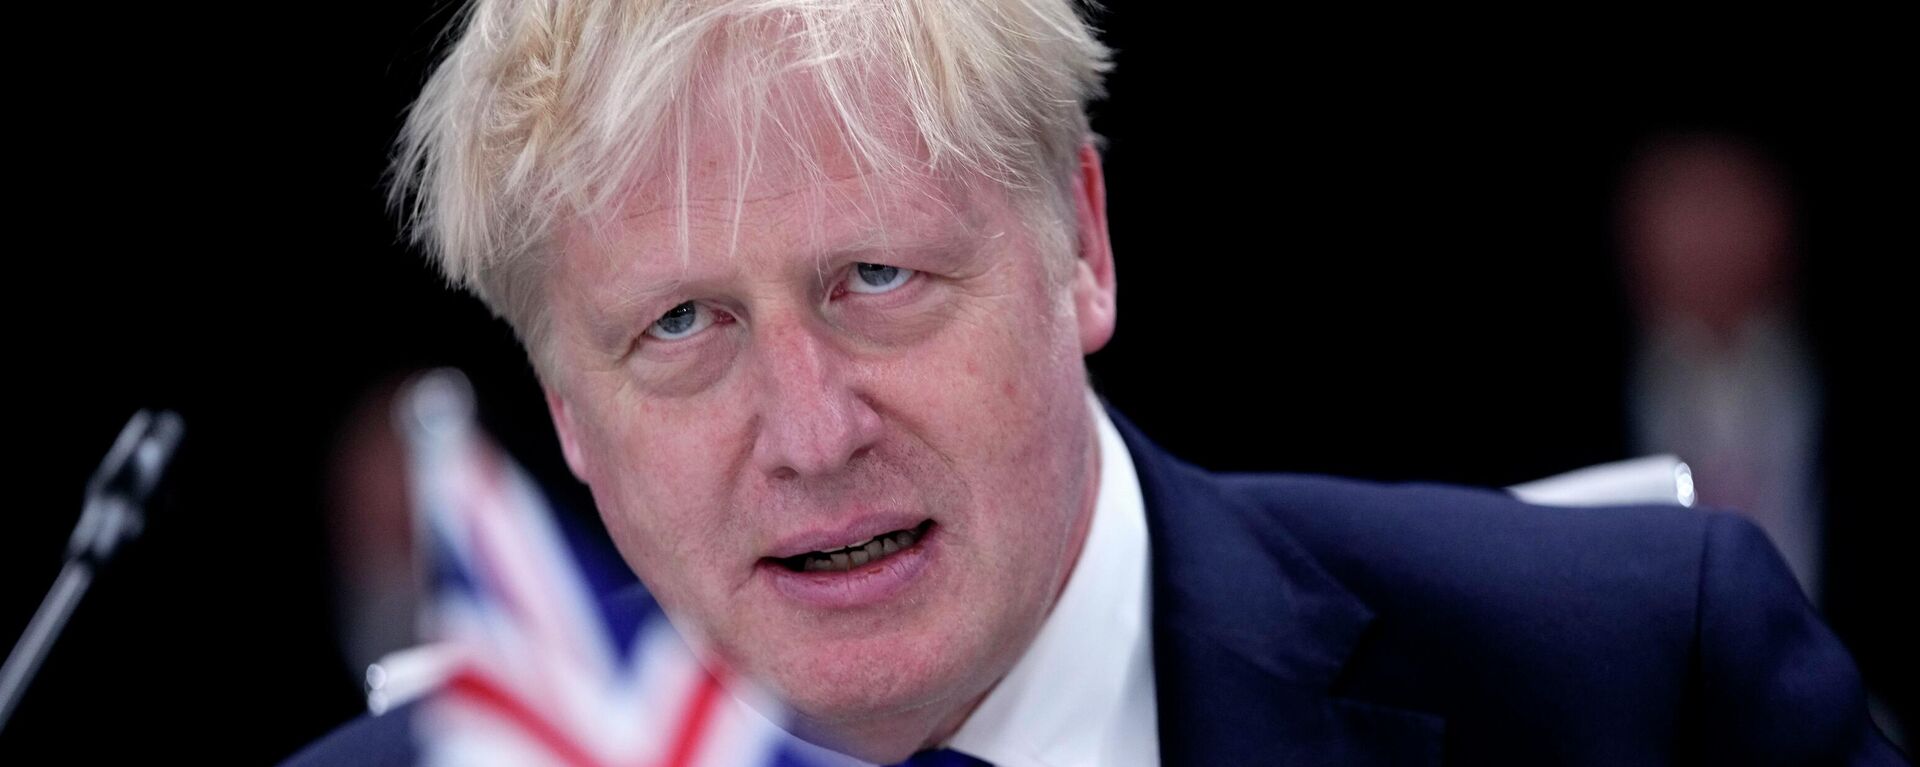 British Prime Minister Boris Johnson waits for the start of a round table meeting at a NATO summit in Madrid, Spain on Wednesday, June 29, 2022 - Sputnik International, 1920, 06.07.2022